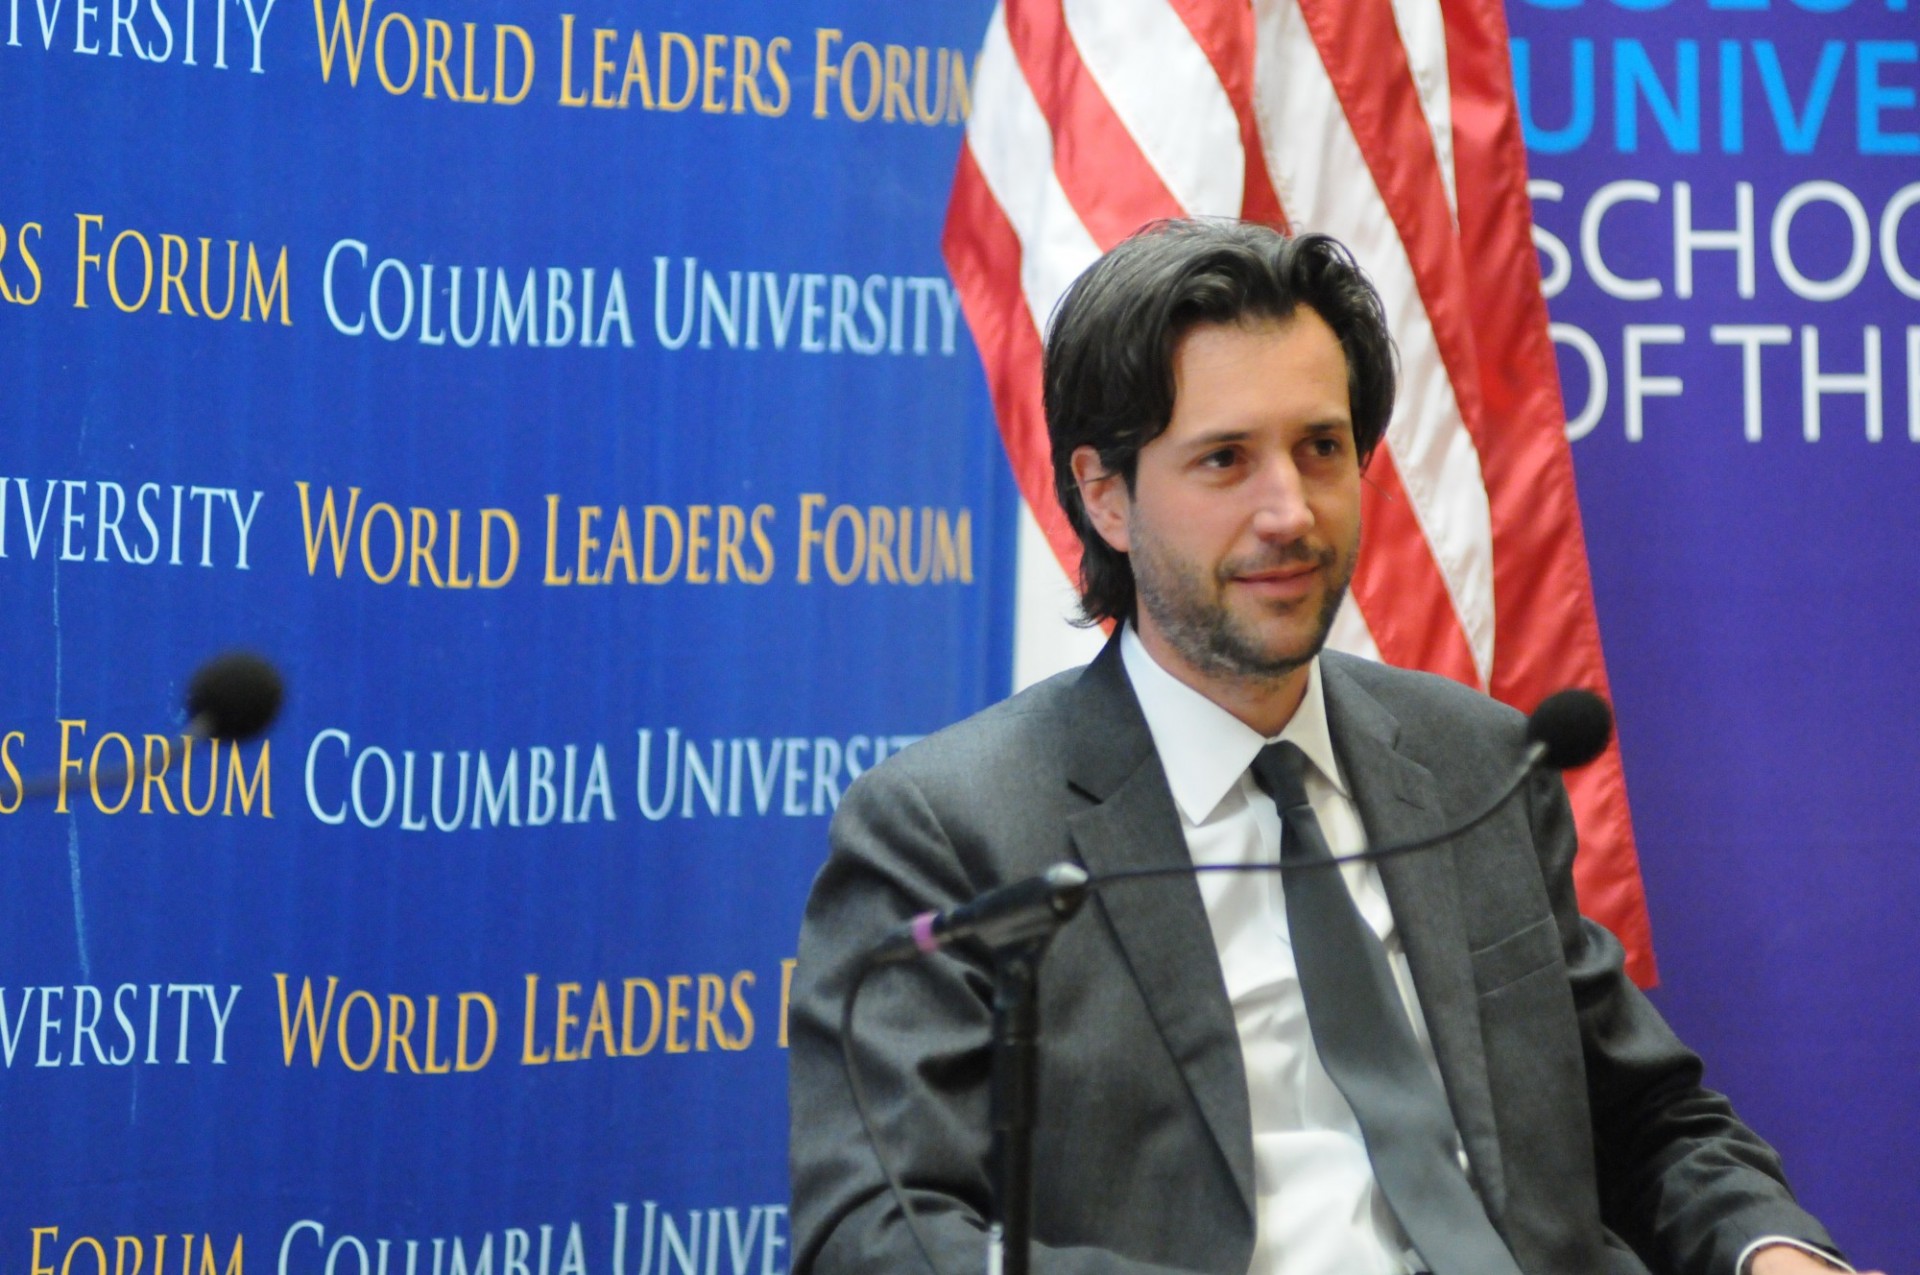 Antonin Baudry, Cultural Counselor, French Embassy in the U.S.